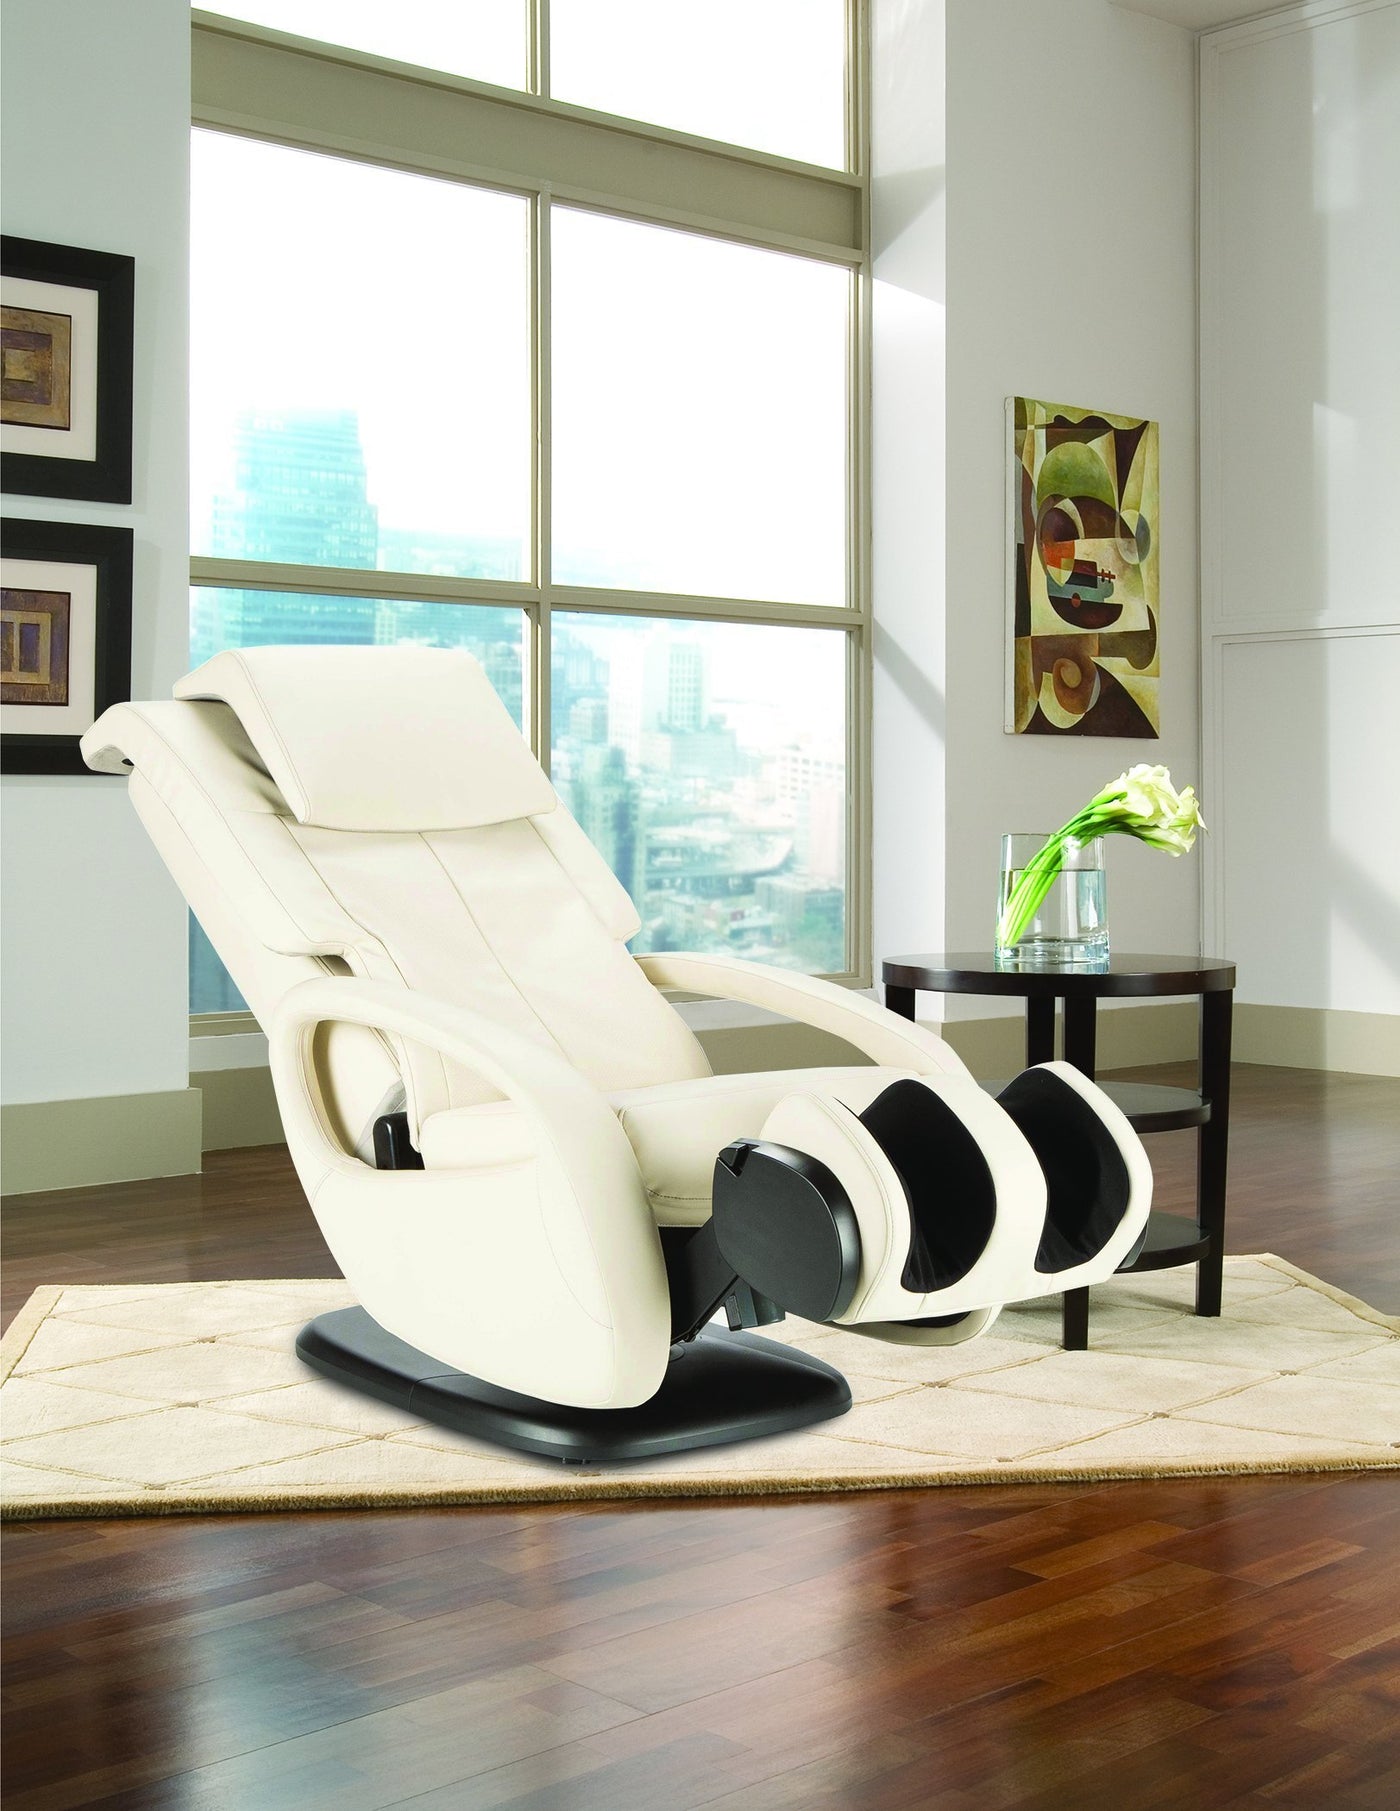 Human Touch WholeBody® 7.1 Massage Chair